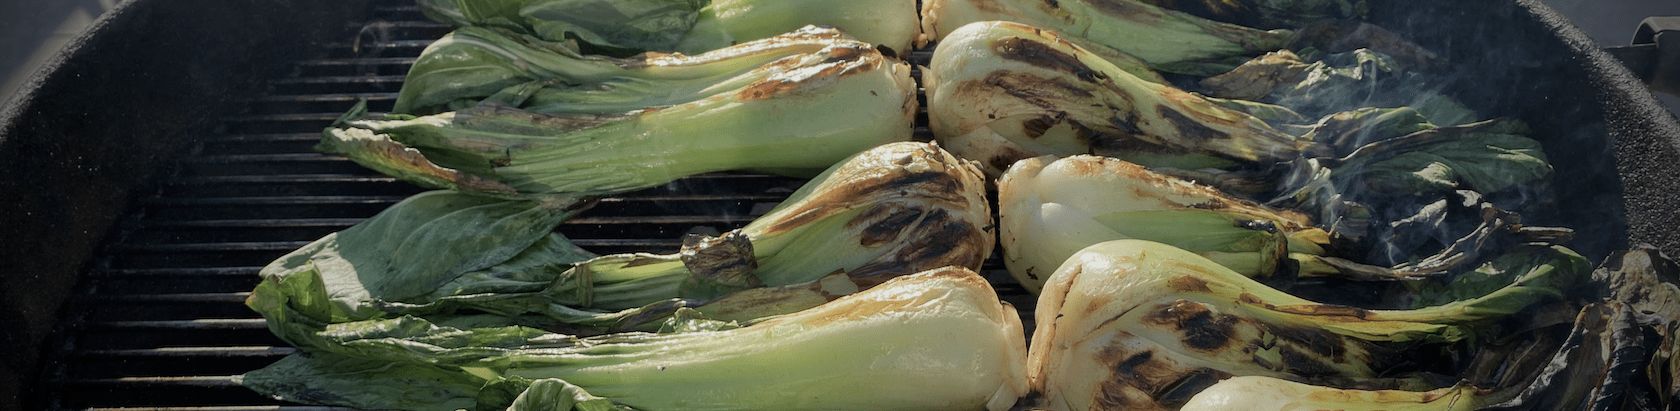 Bok Choy grilling on a charcoal kettle grill